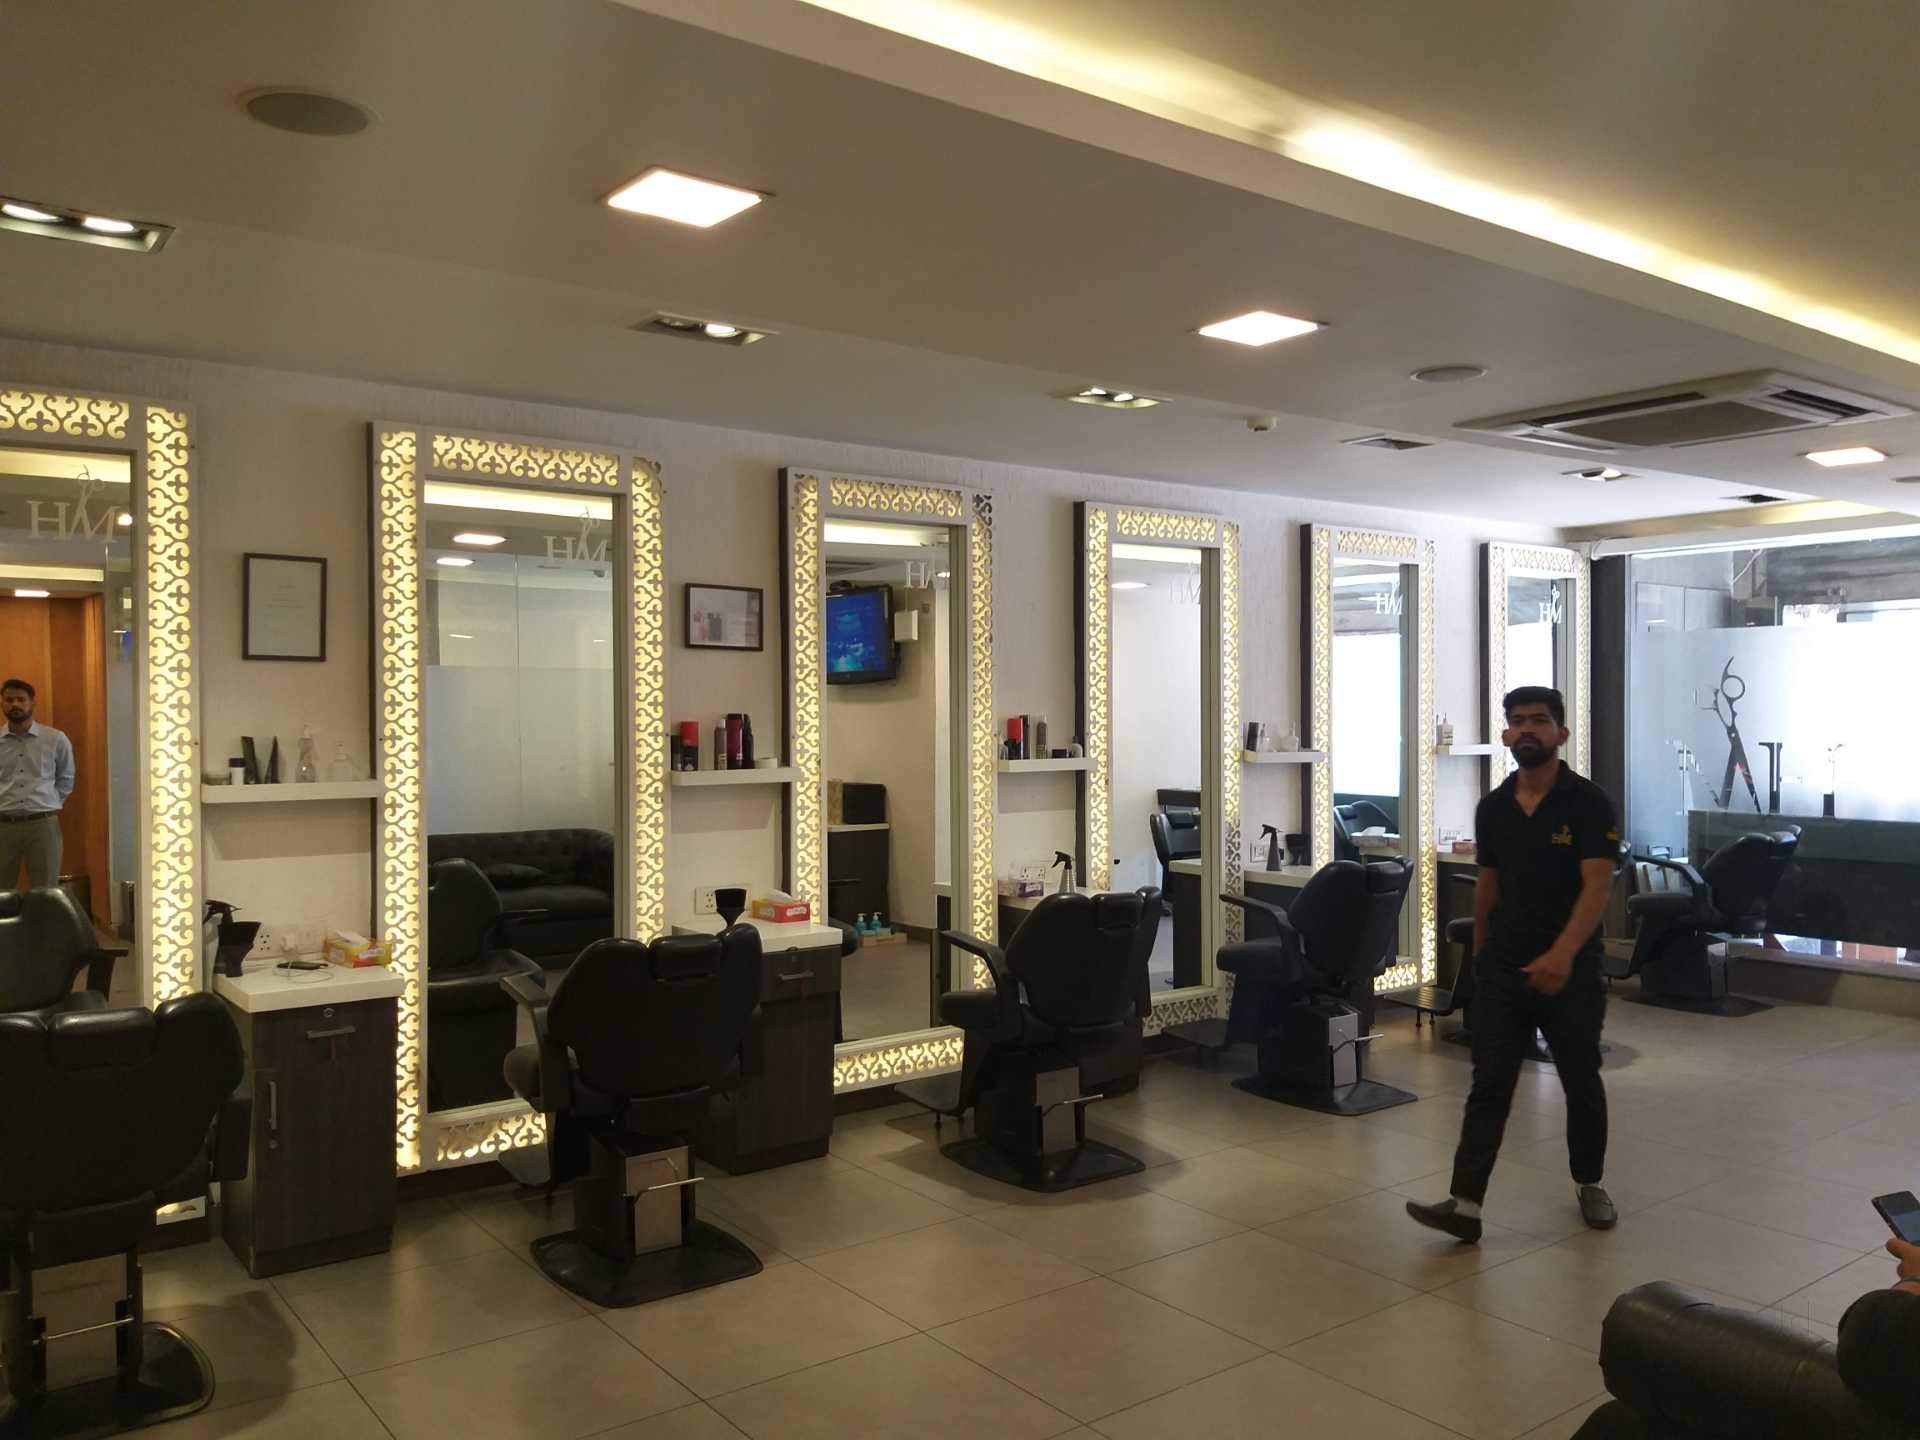 Hair Masters Luxury Salon deals in Chattarpur, Delhi NCR, reviews, best  offers, Coupons for Hair Masters Luxury Salon, Chattarpur | mydala